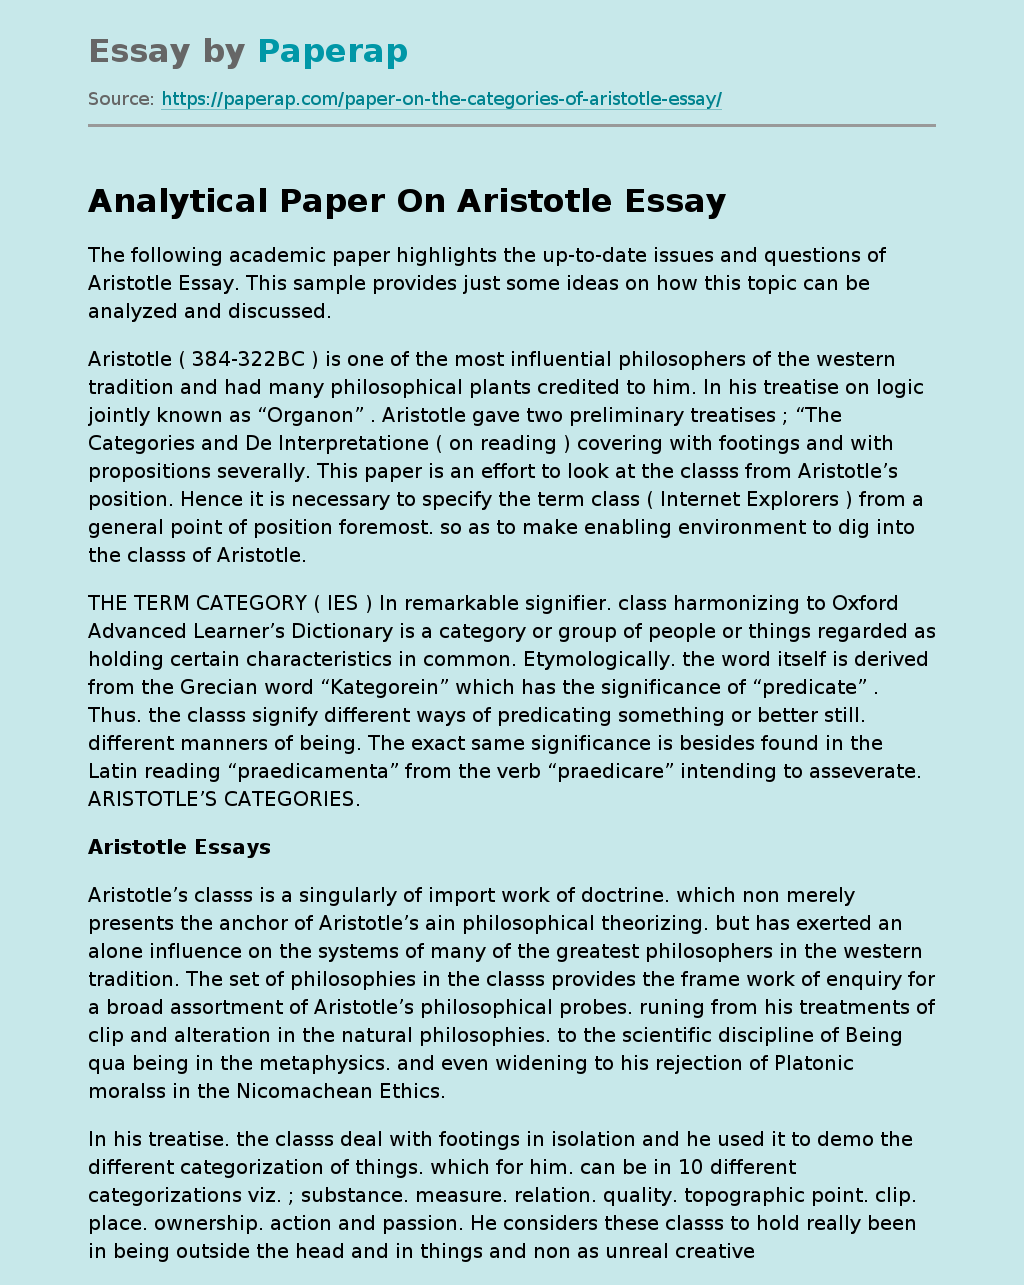 Analytical Paper On Aristotle